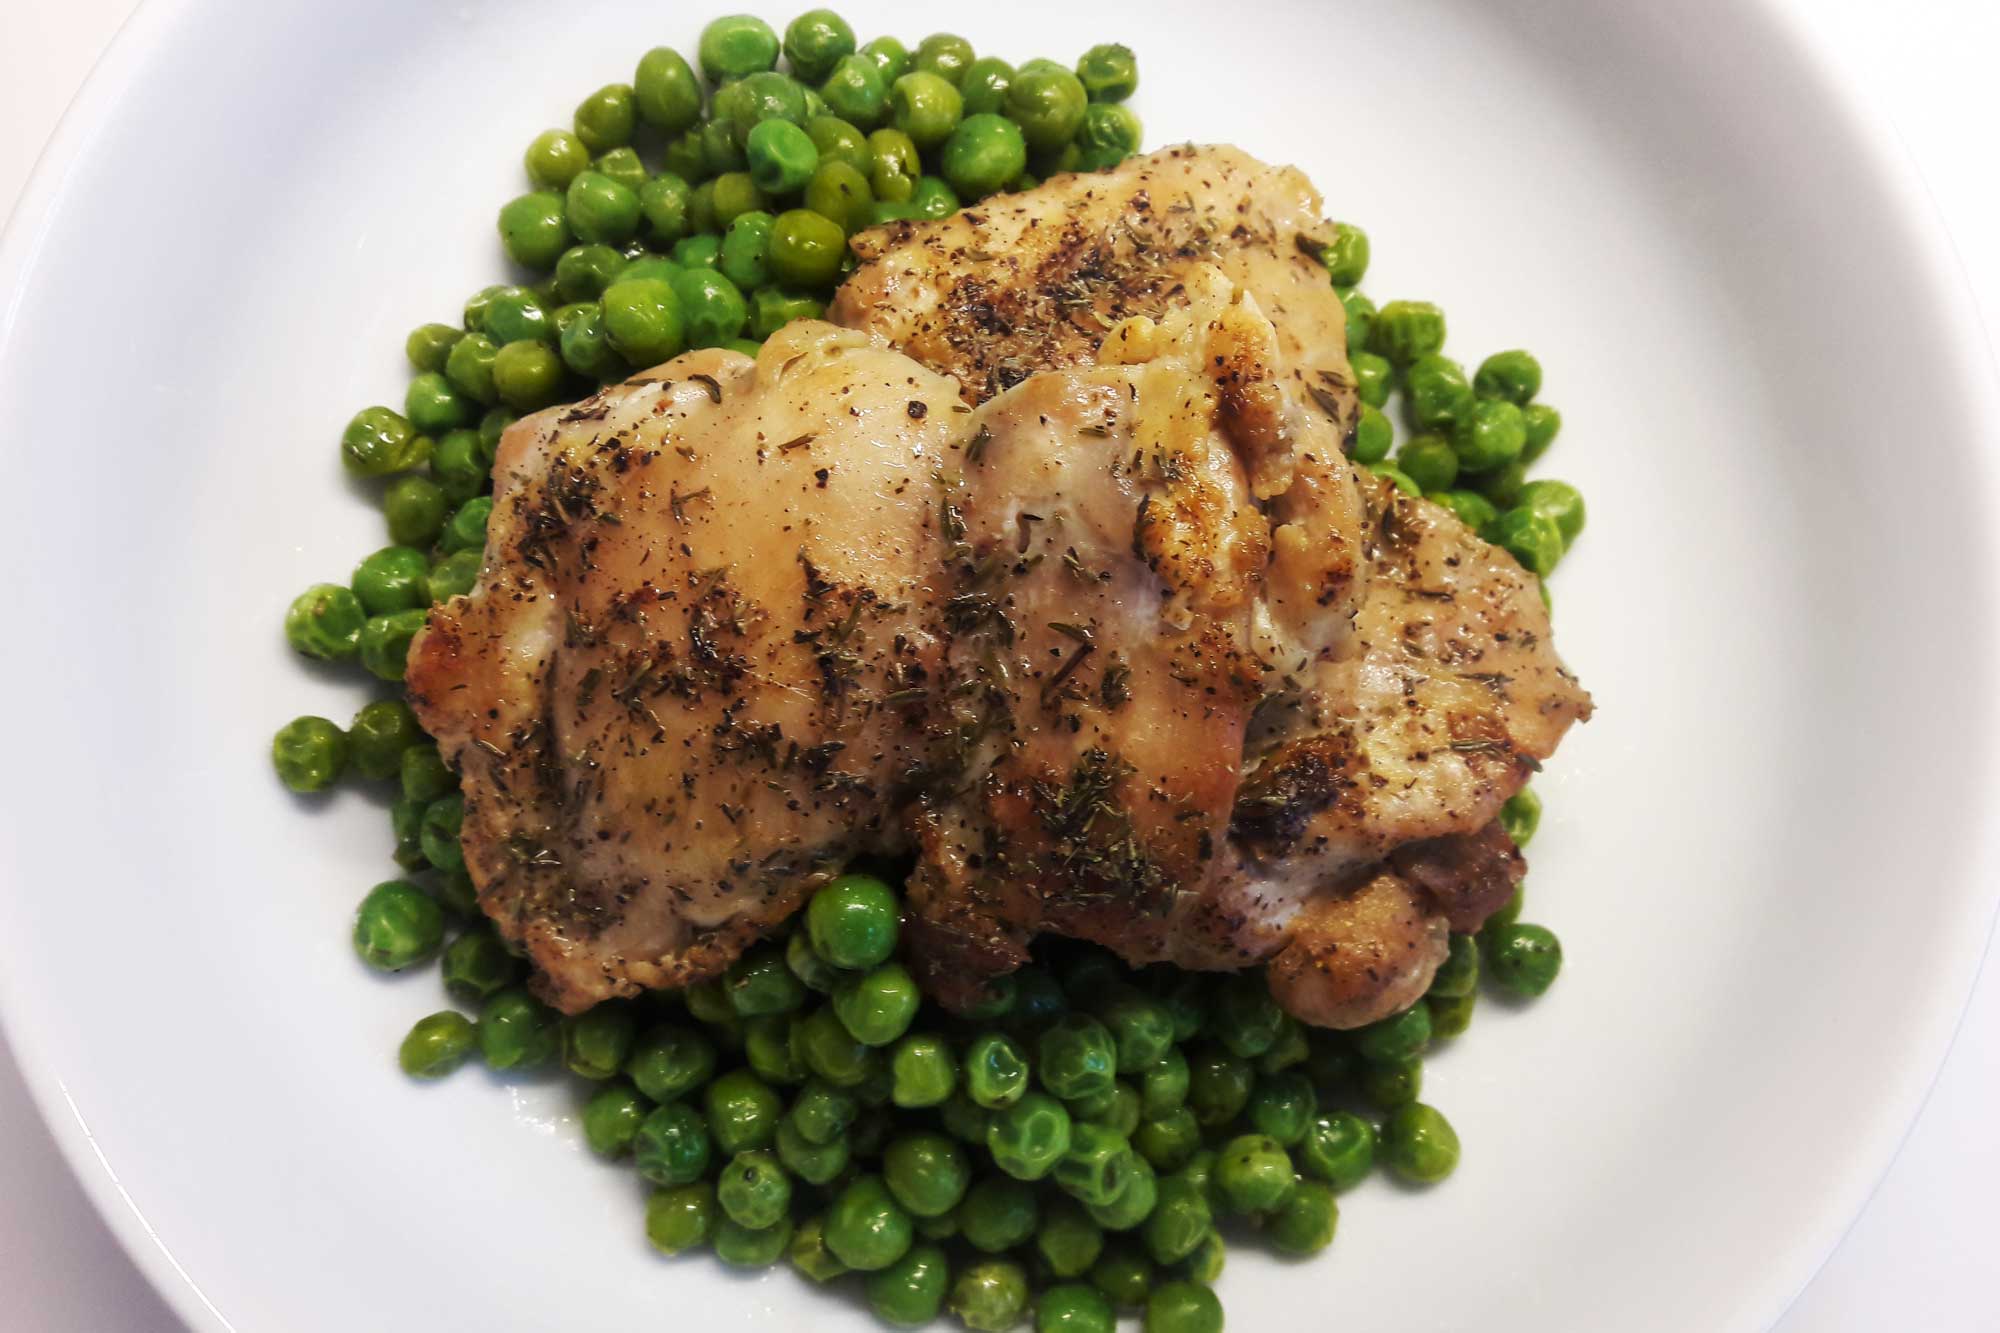 Chicken and peas